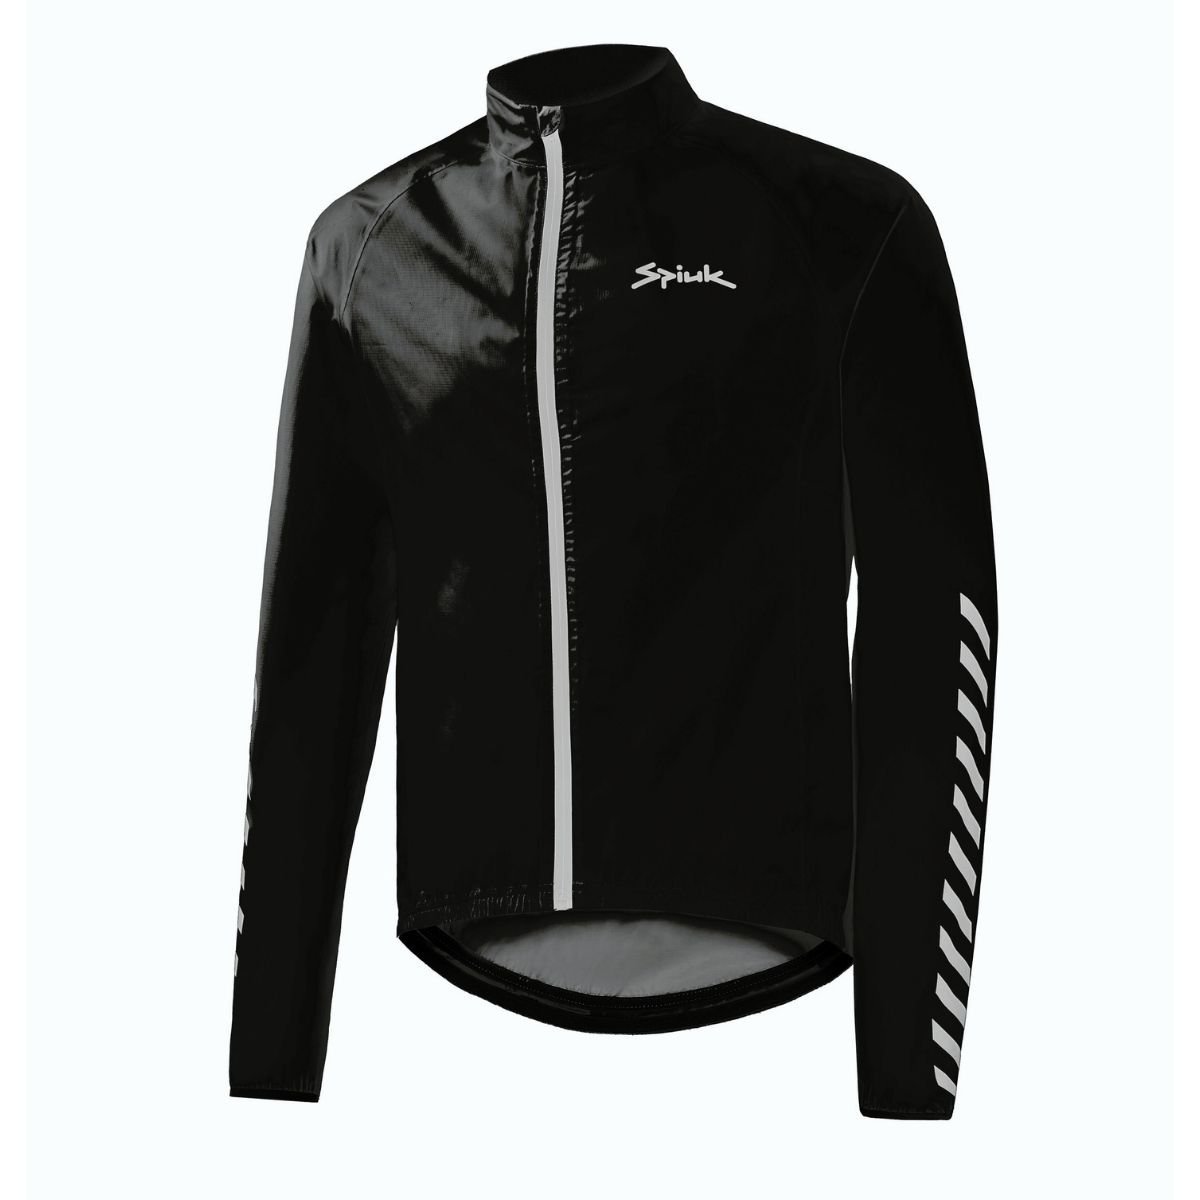 Chaqueta Impermeable Top Ten Spiuk Negro Bicycles4ever